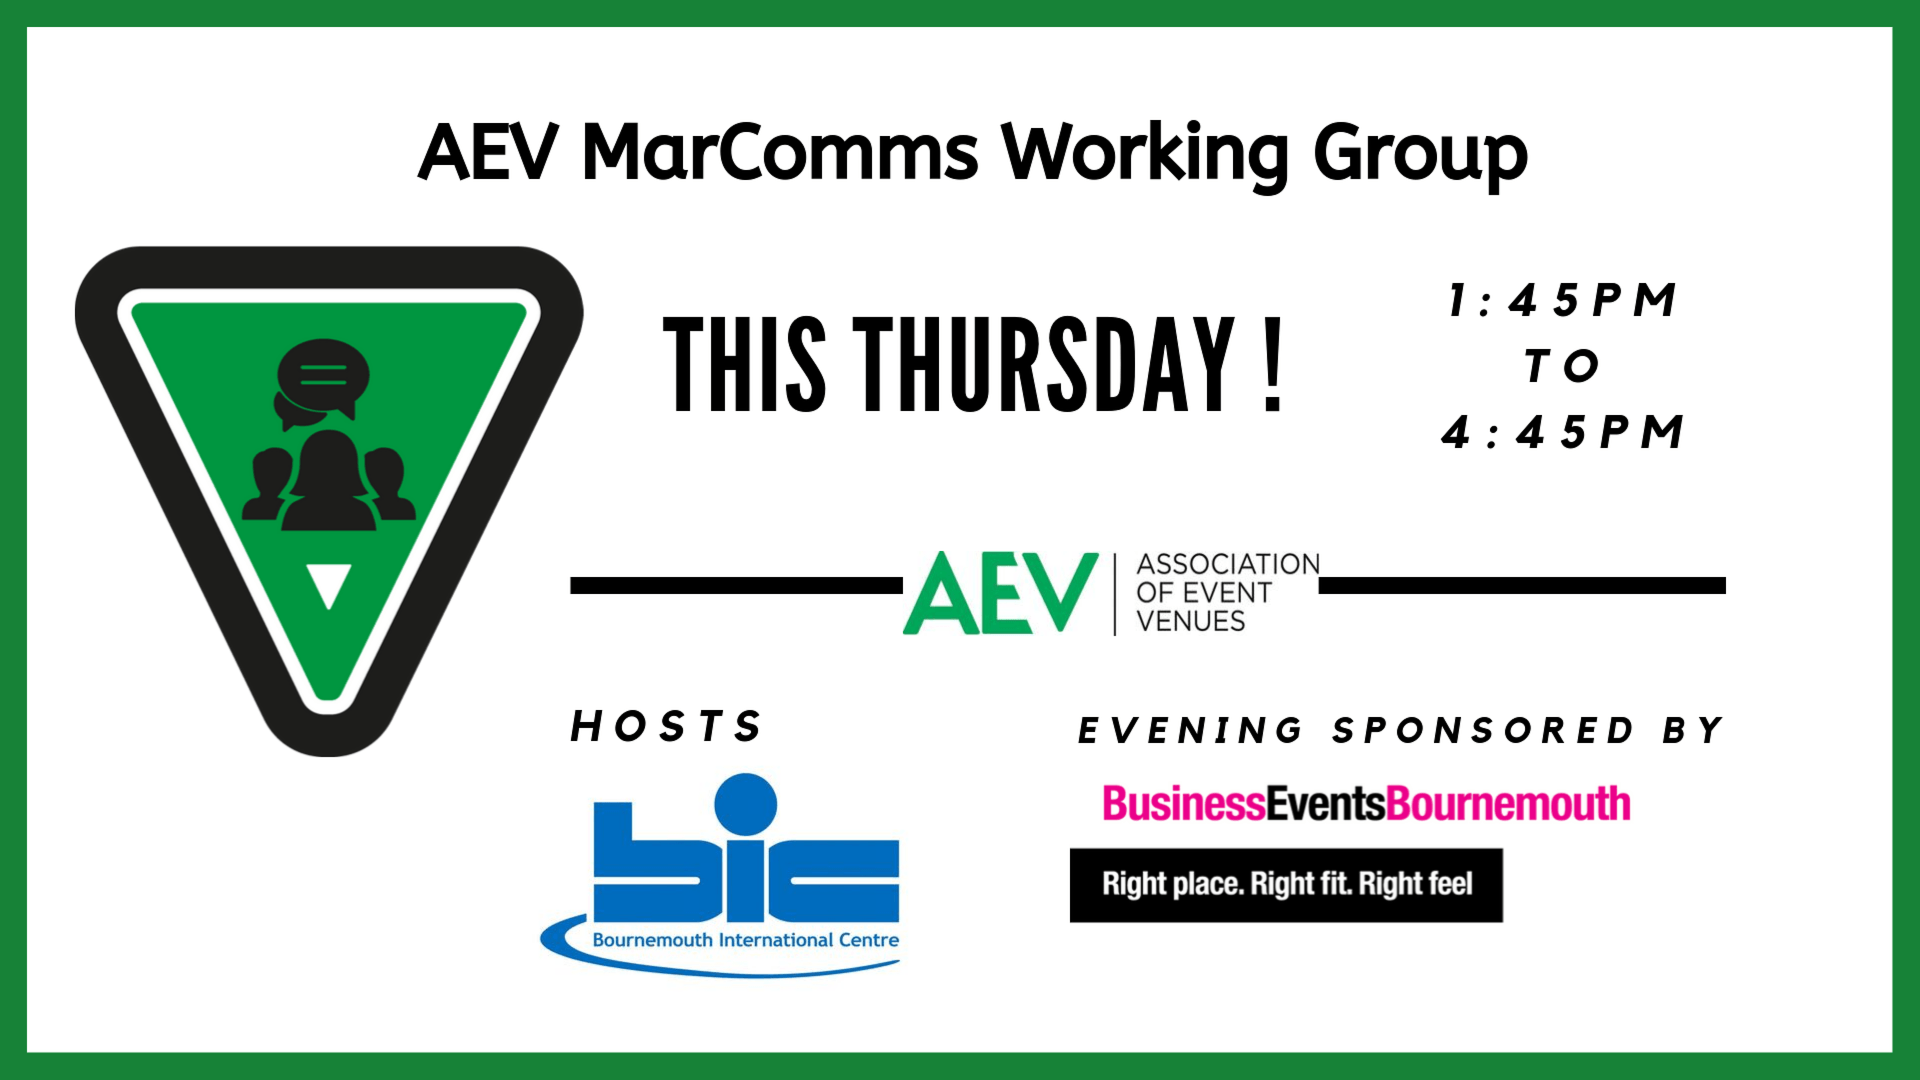 AEV MarComms Working Group meeting at Bournemouth International Centre on 26th September